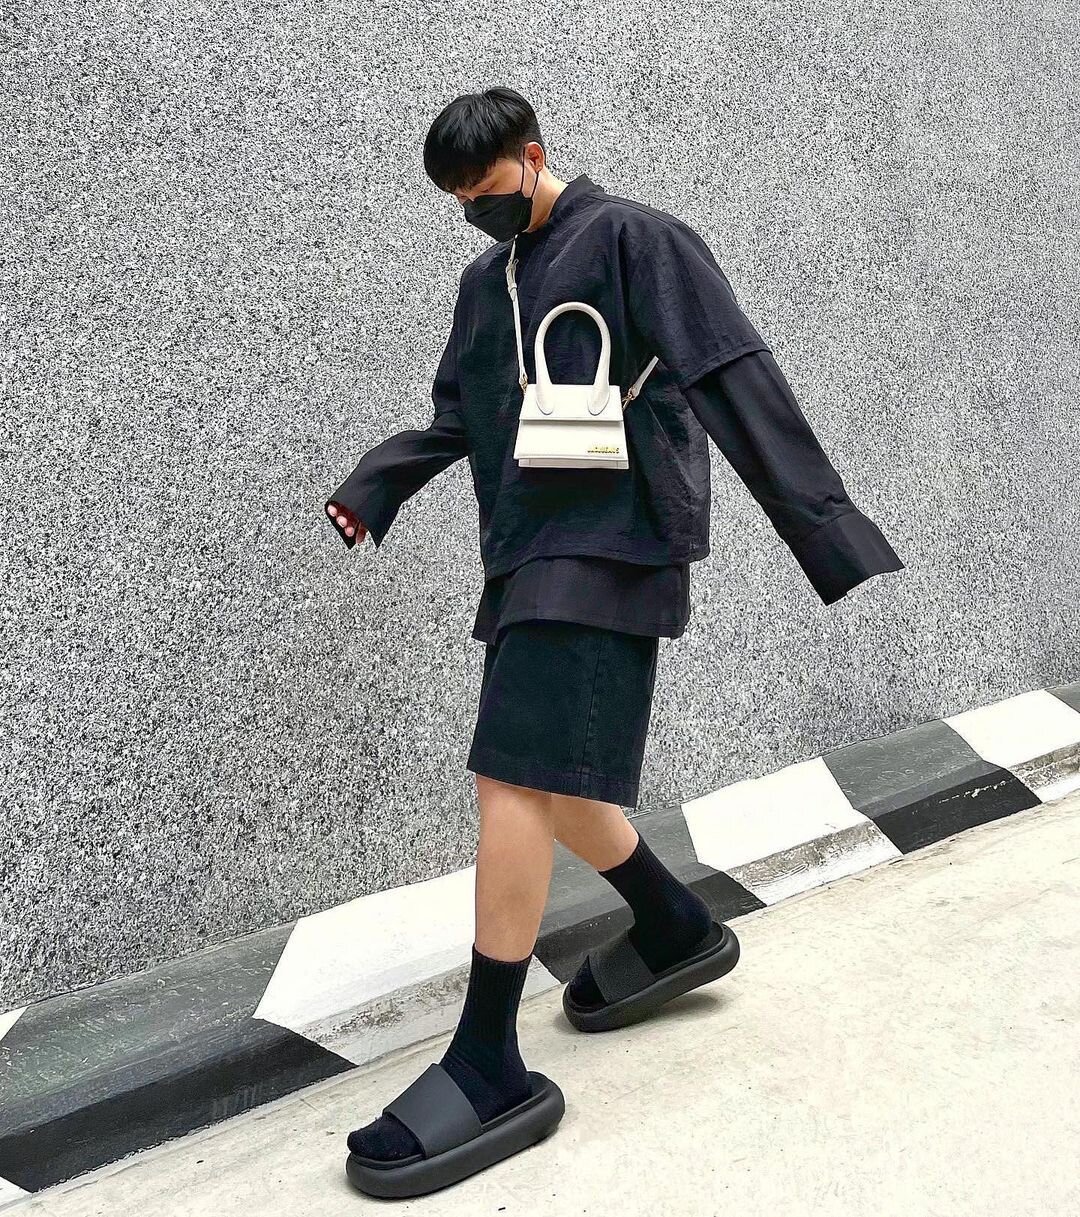 13. Bag Styling by Men